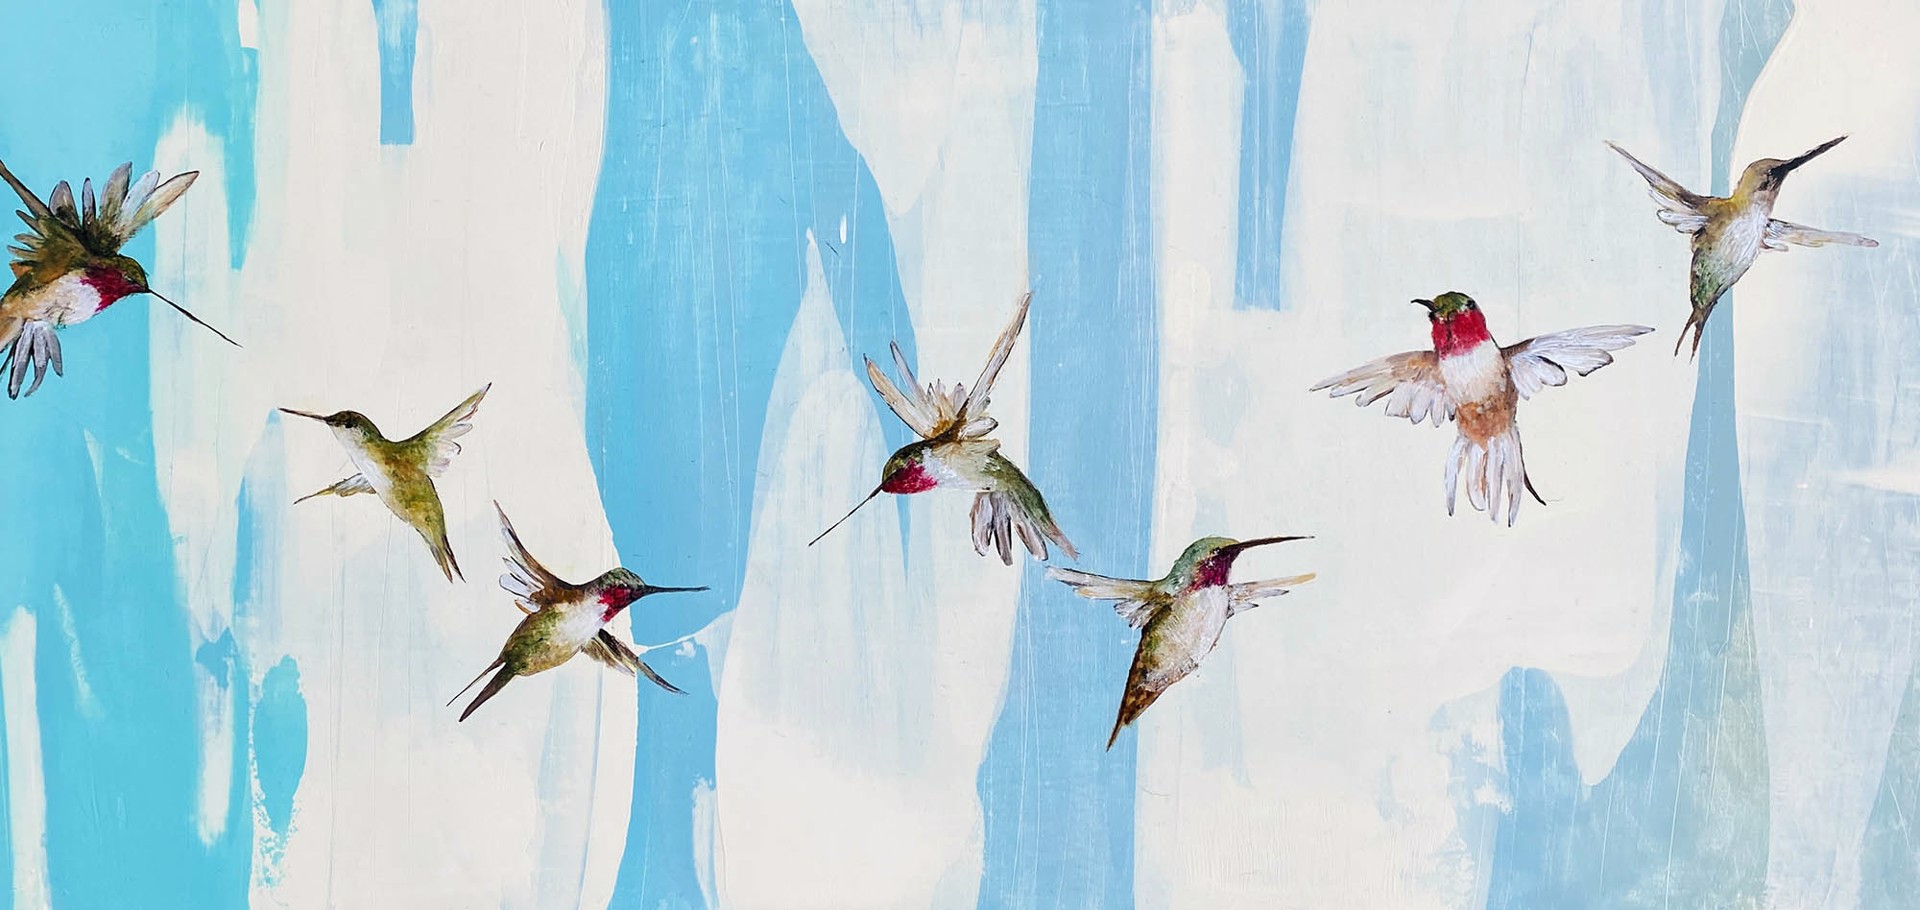 Original Mixed Media Painting By Jenna Von Benedikt Featuring Hummingbirds Across Abstract Background In Blue And White 